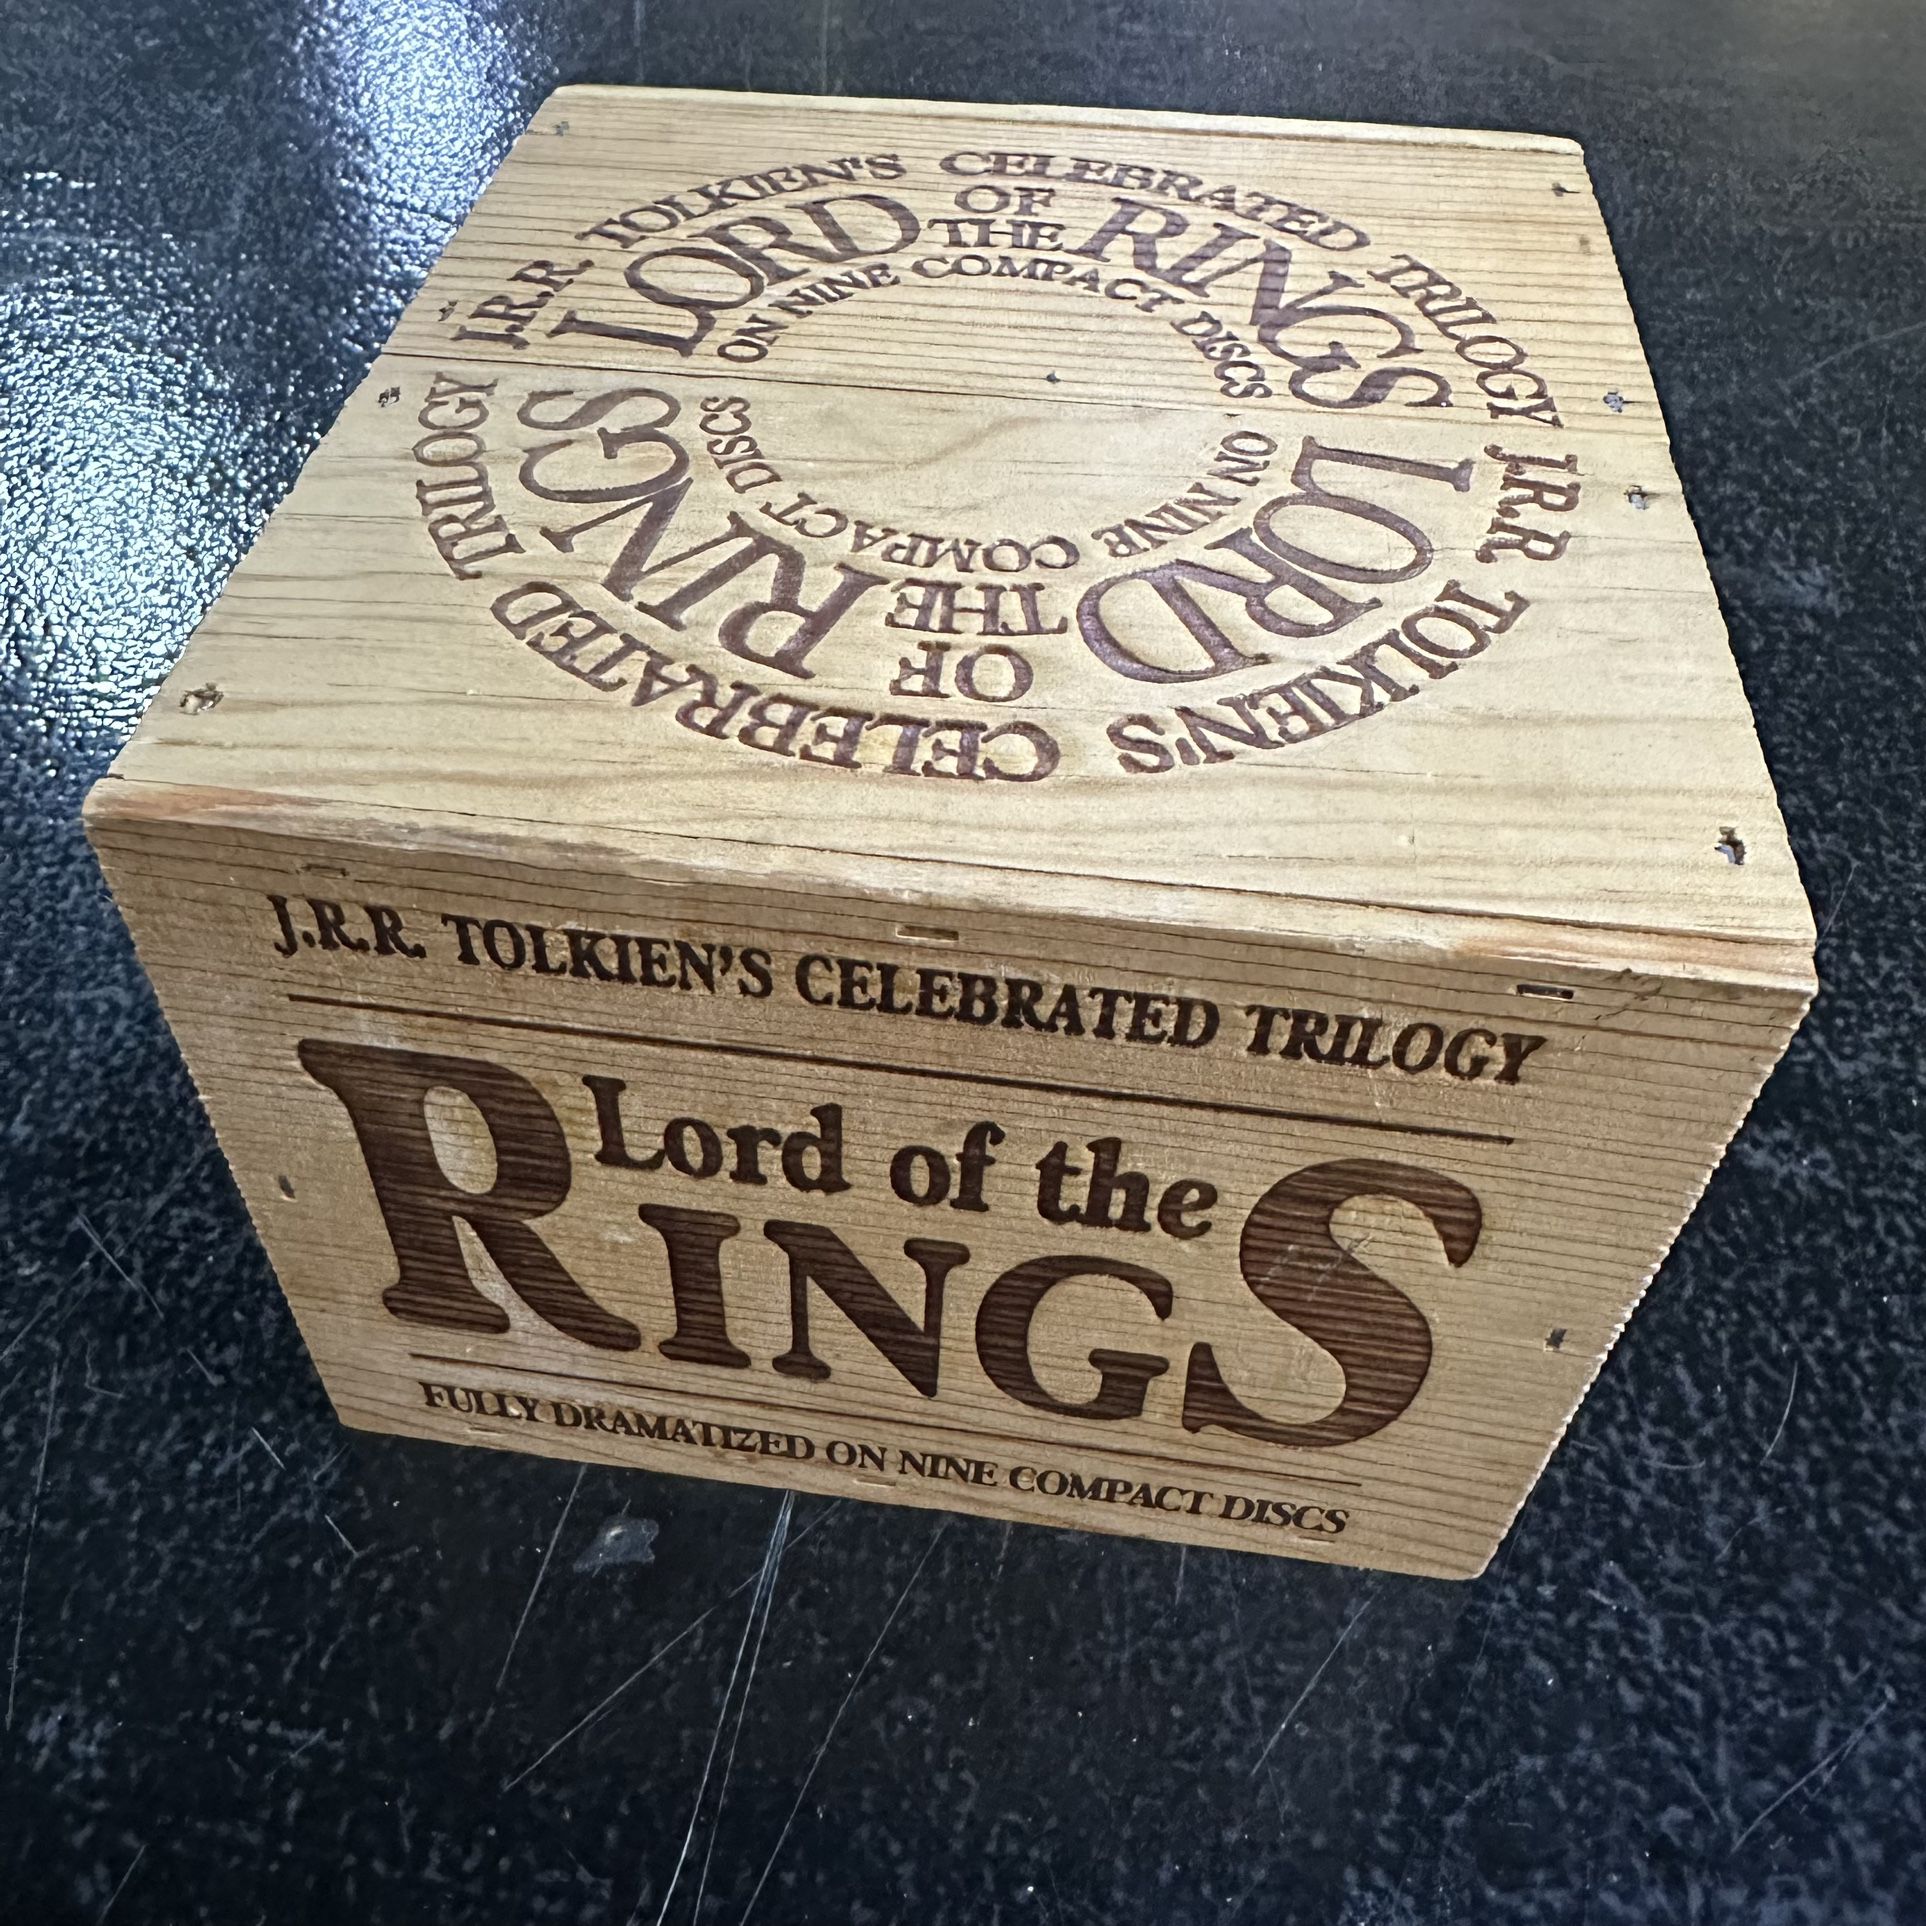 Lord of the Rings Trilogy Audio Book Wooden Box Set